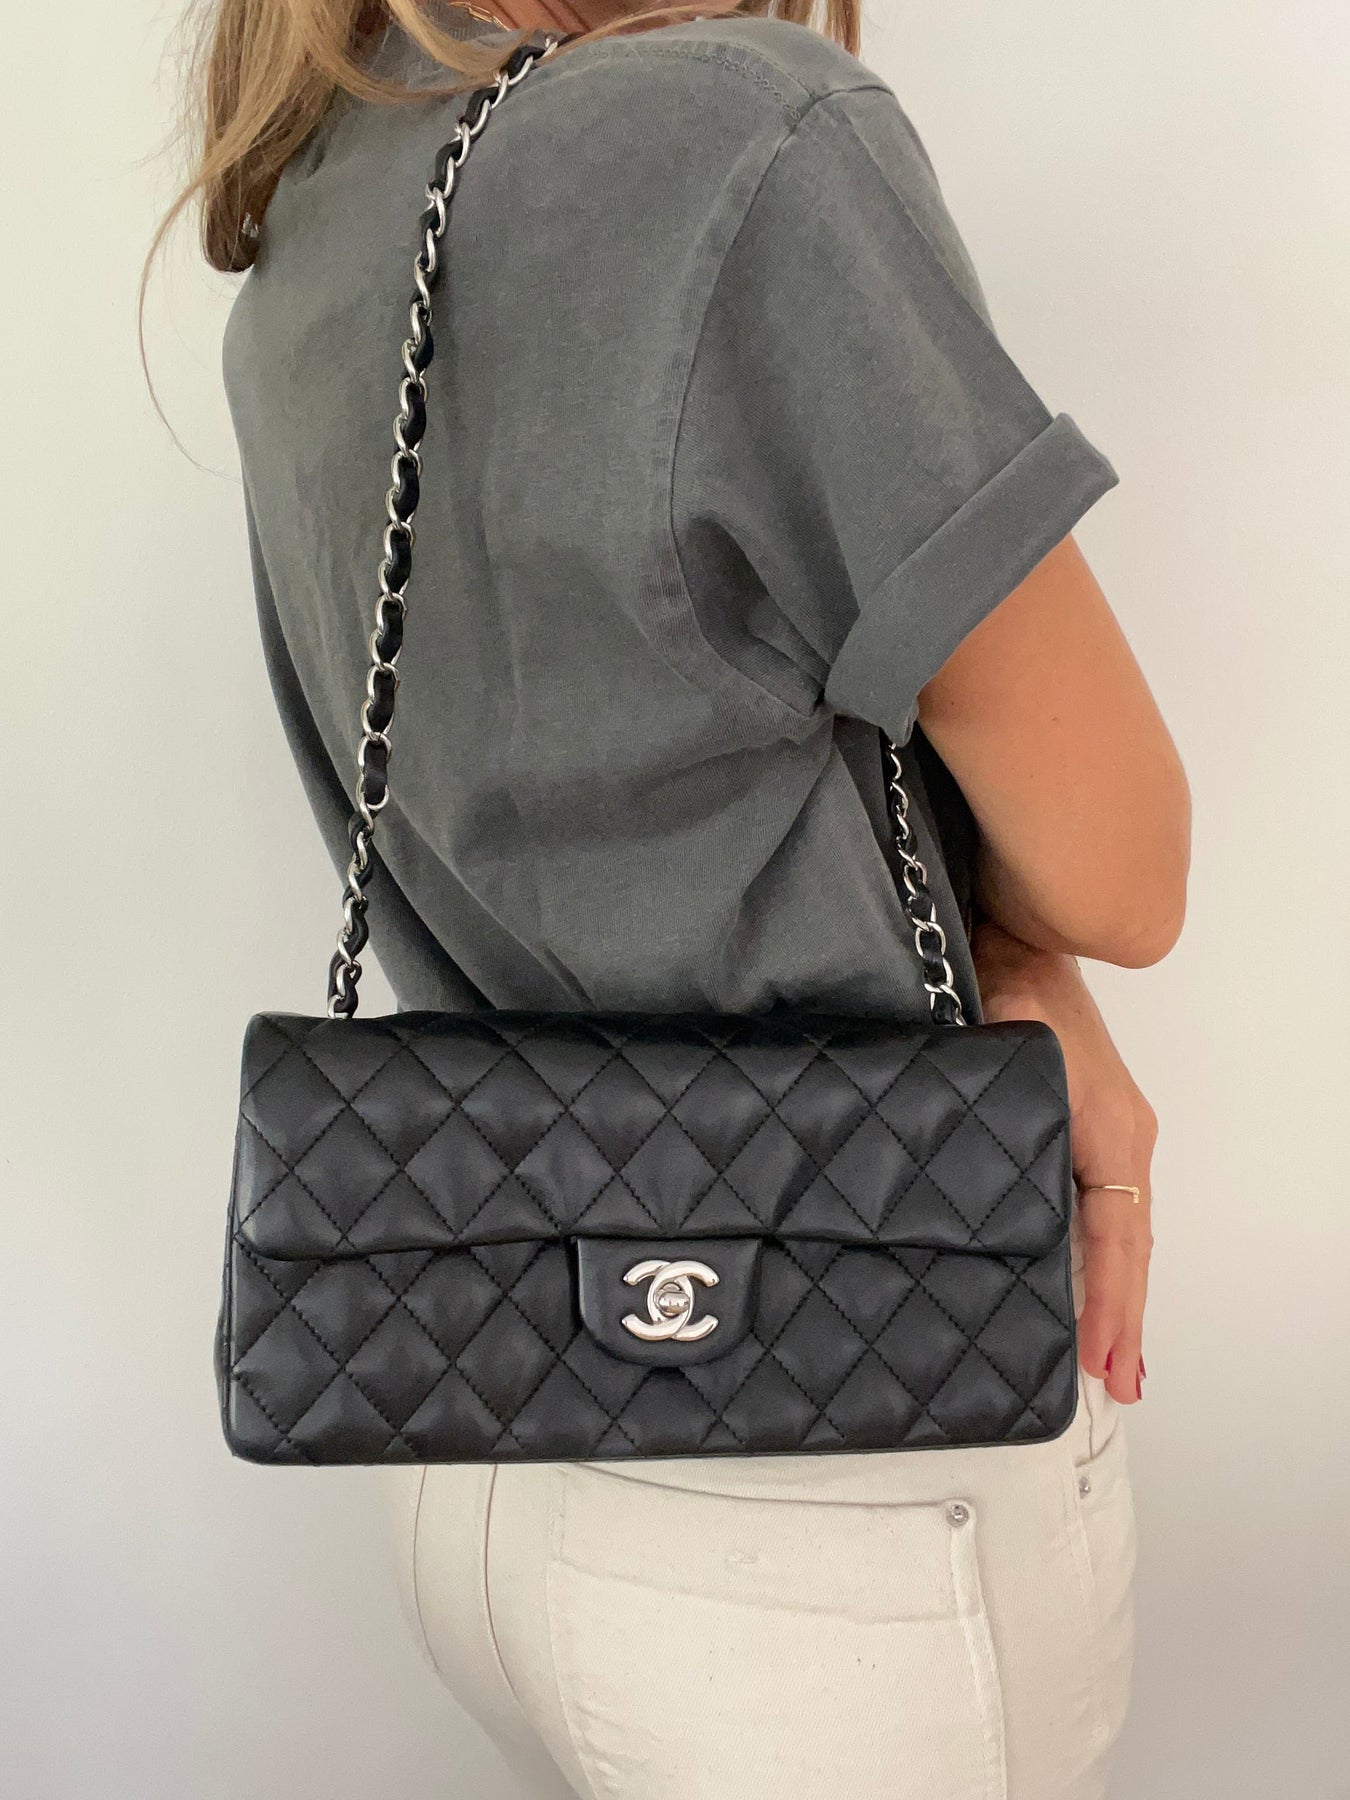 East West Flap Bag in Black Lambskin and Silver Hardware